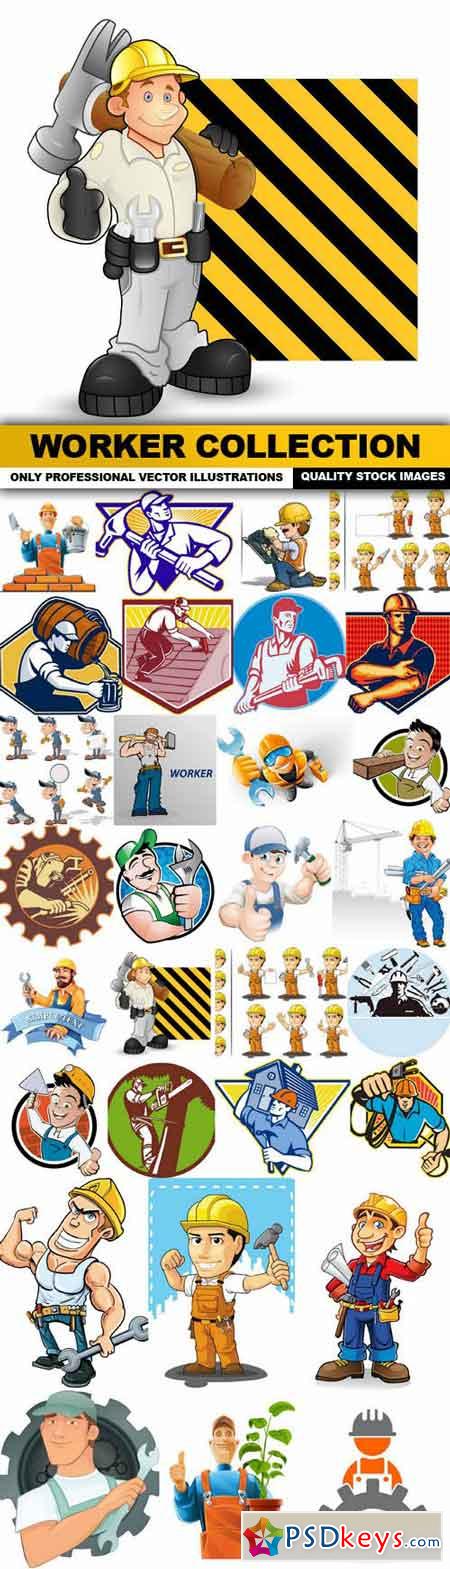 Worker Collection - 30 Vector